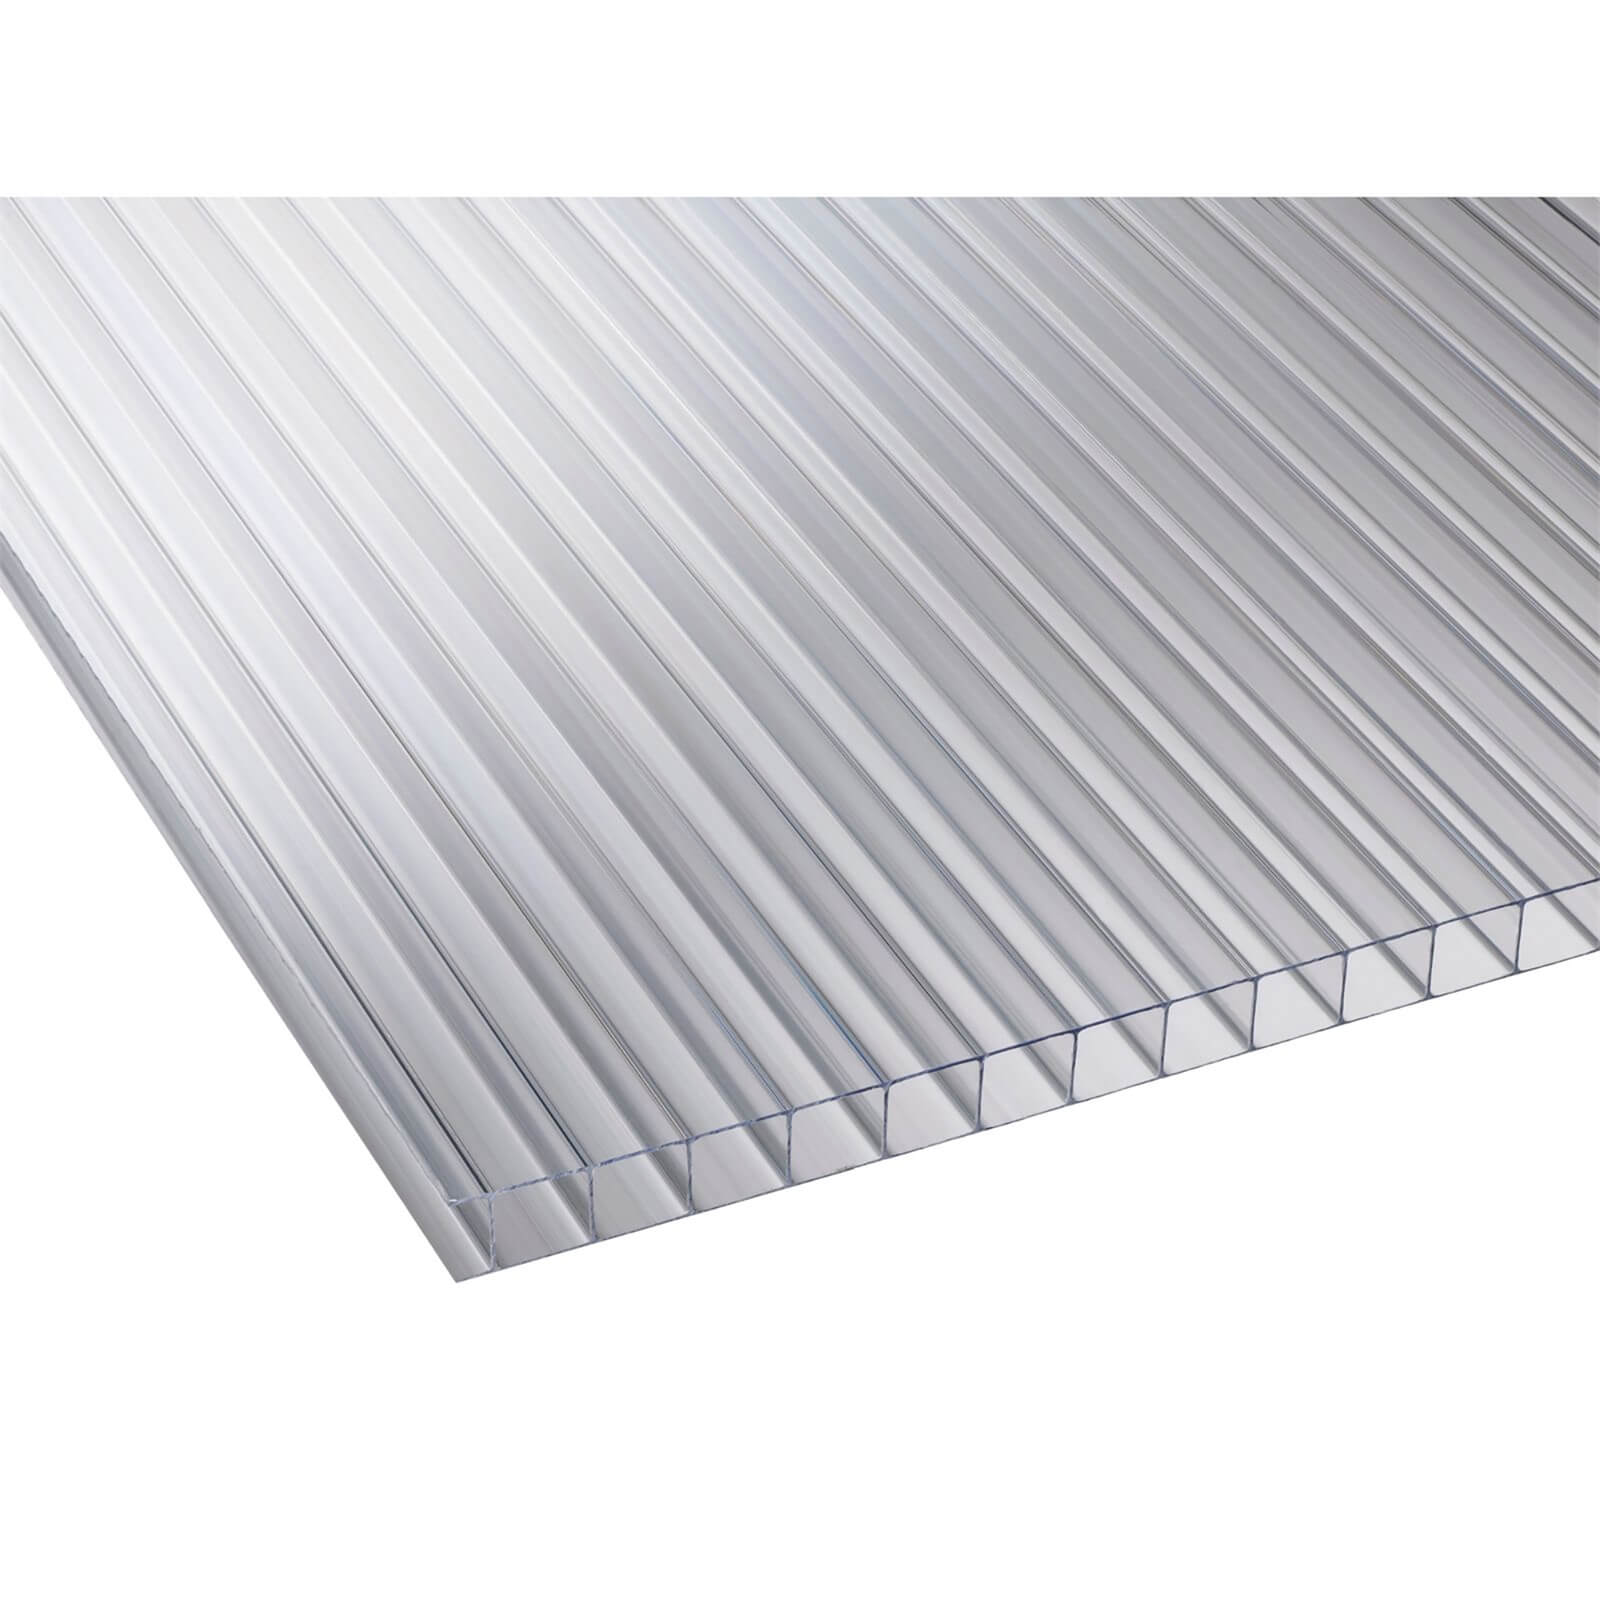 Photo of Corotherm Glazing & Roofing Sheet 2500x1050x10mm - 3 Pack